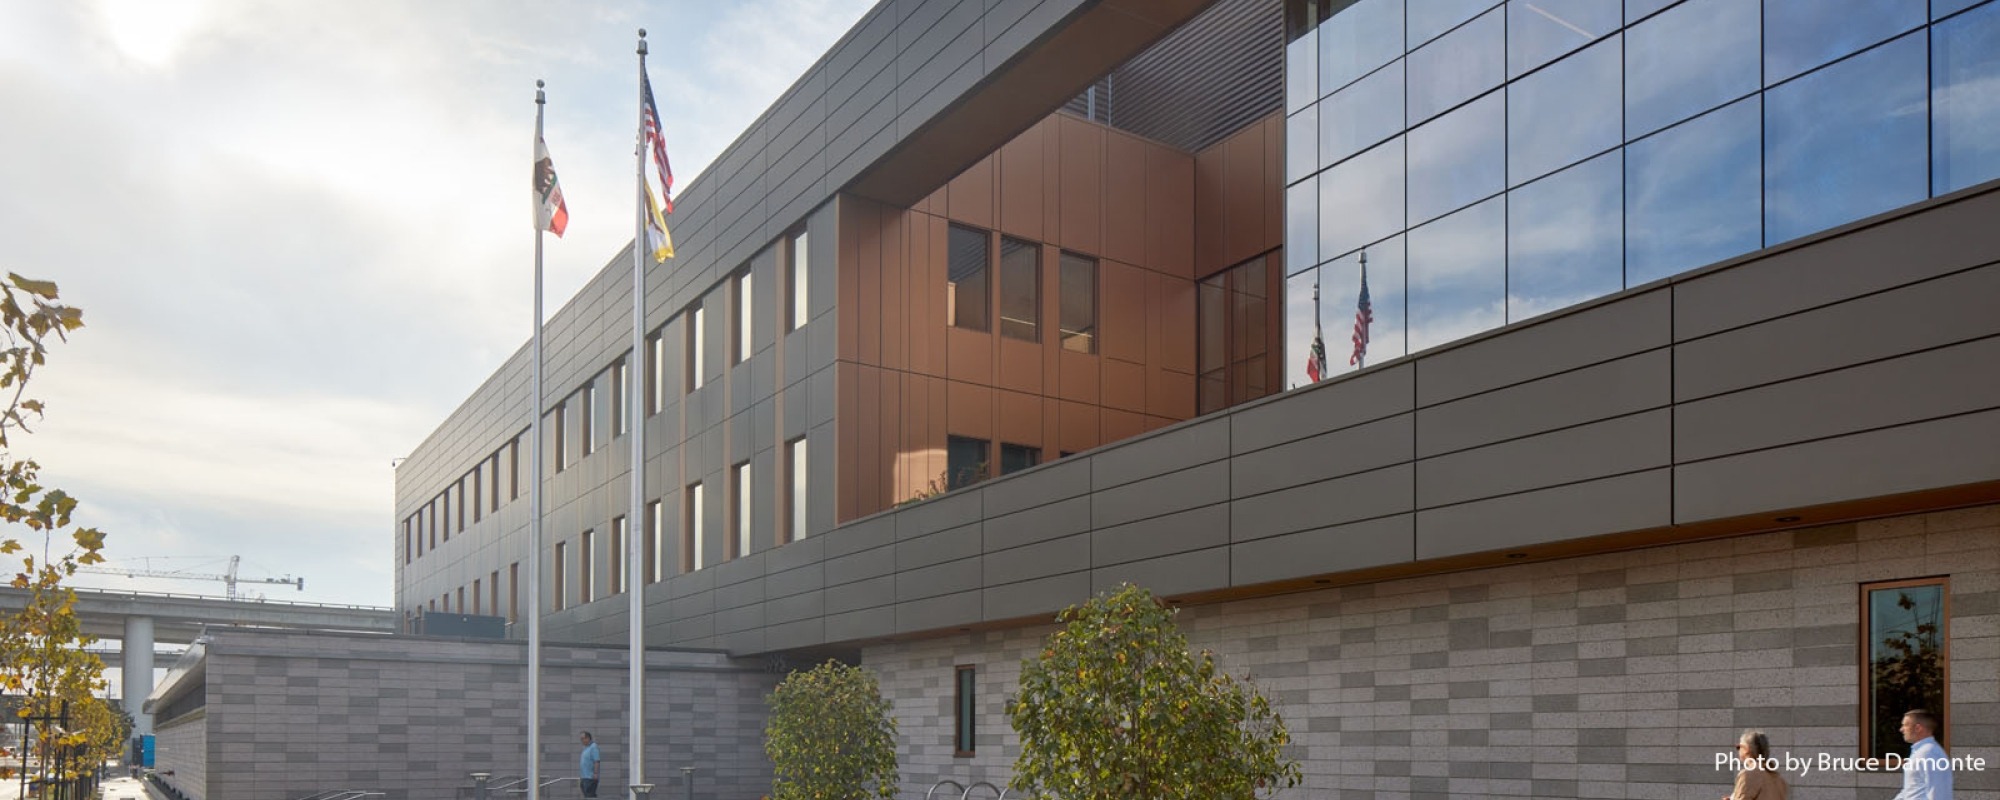 The Traffic Company and Forensic Services Division facility for the San Francisco Police Department.